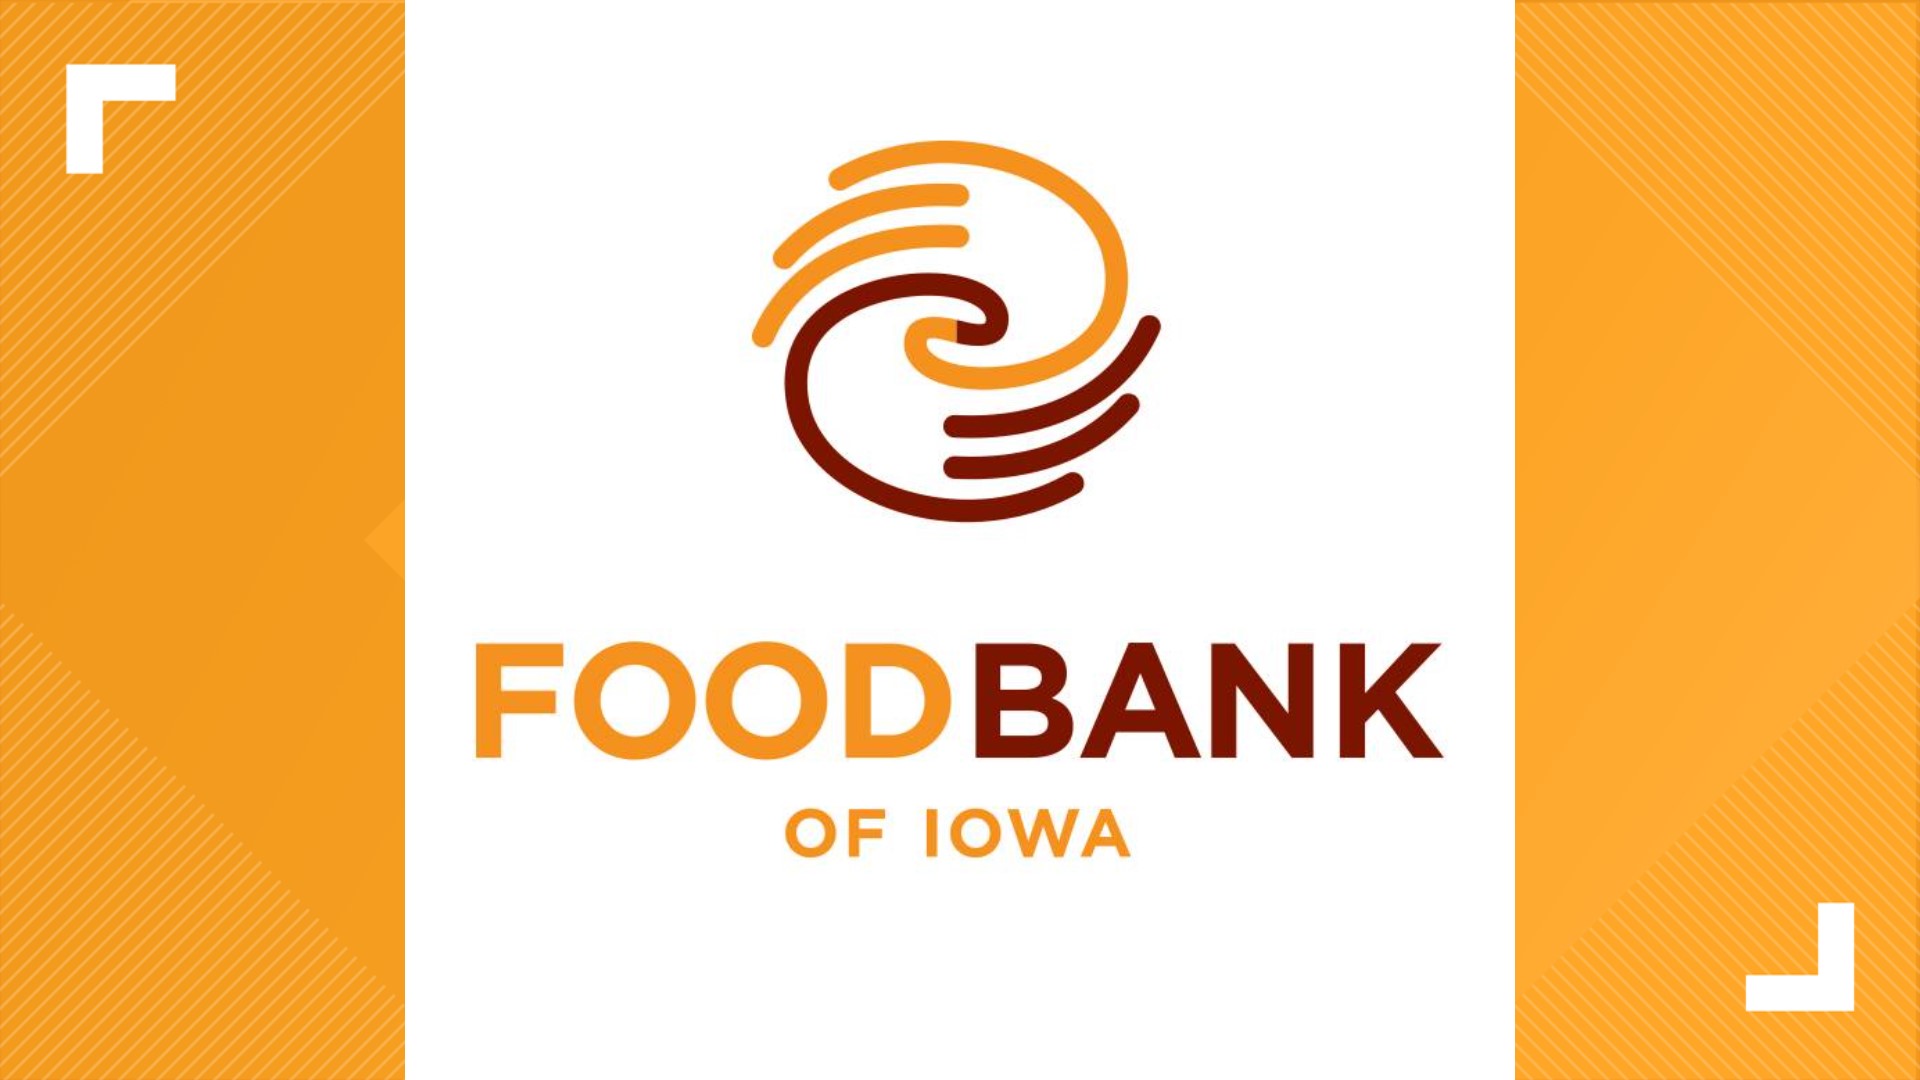 The Food Bank of Iowa is known for providing food at a reduced price to nonprofits and charities across the metro.